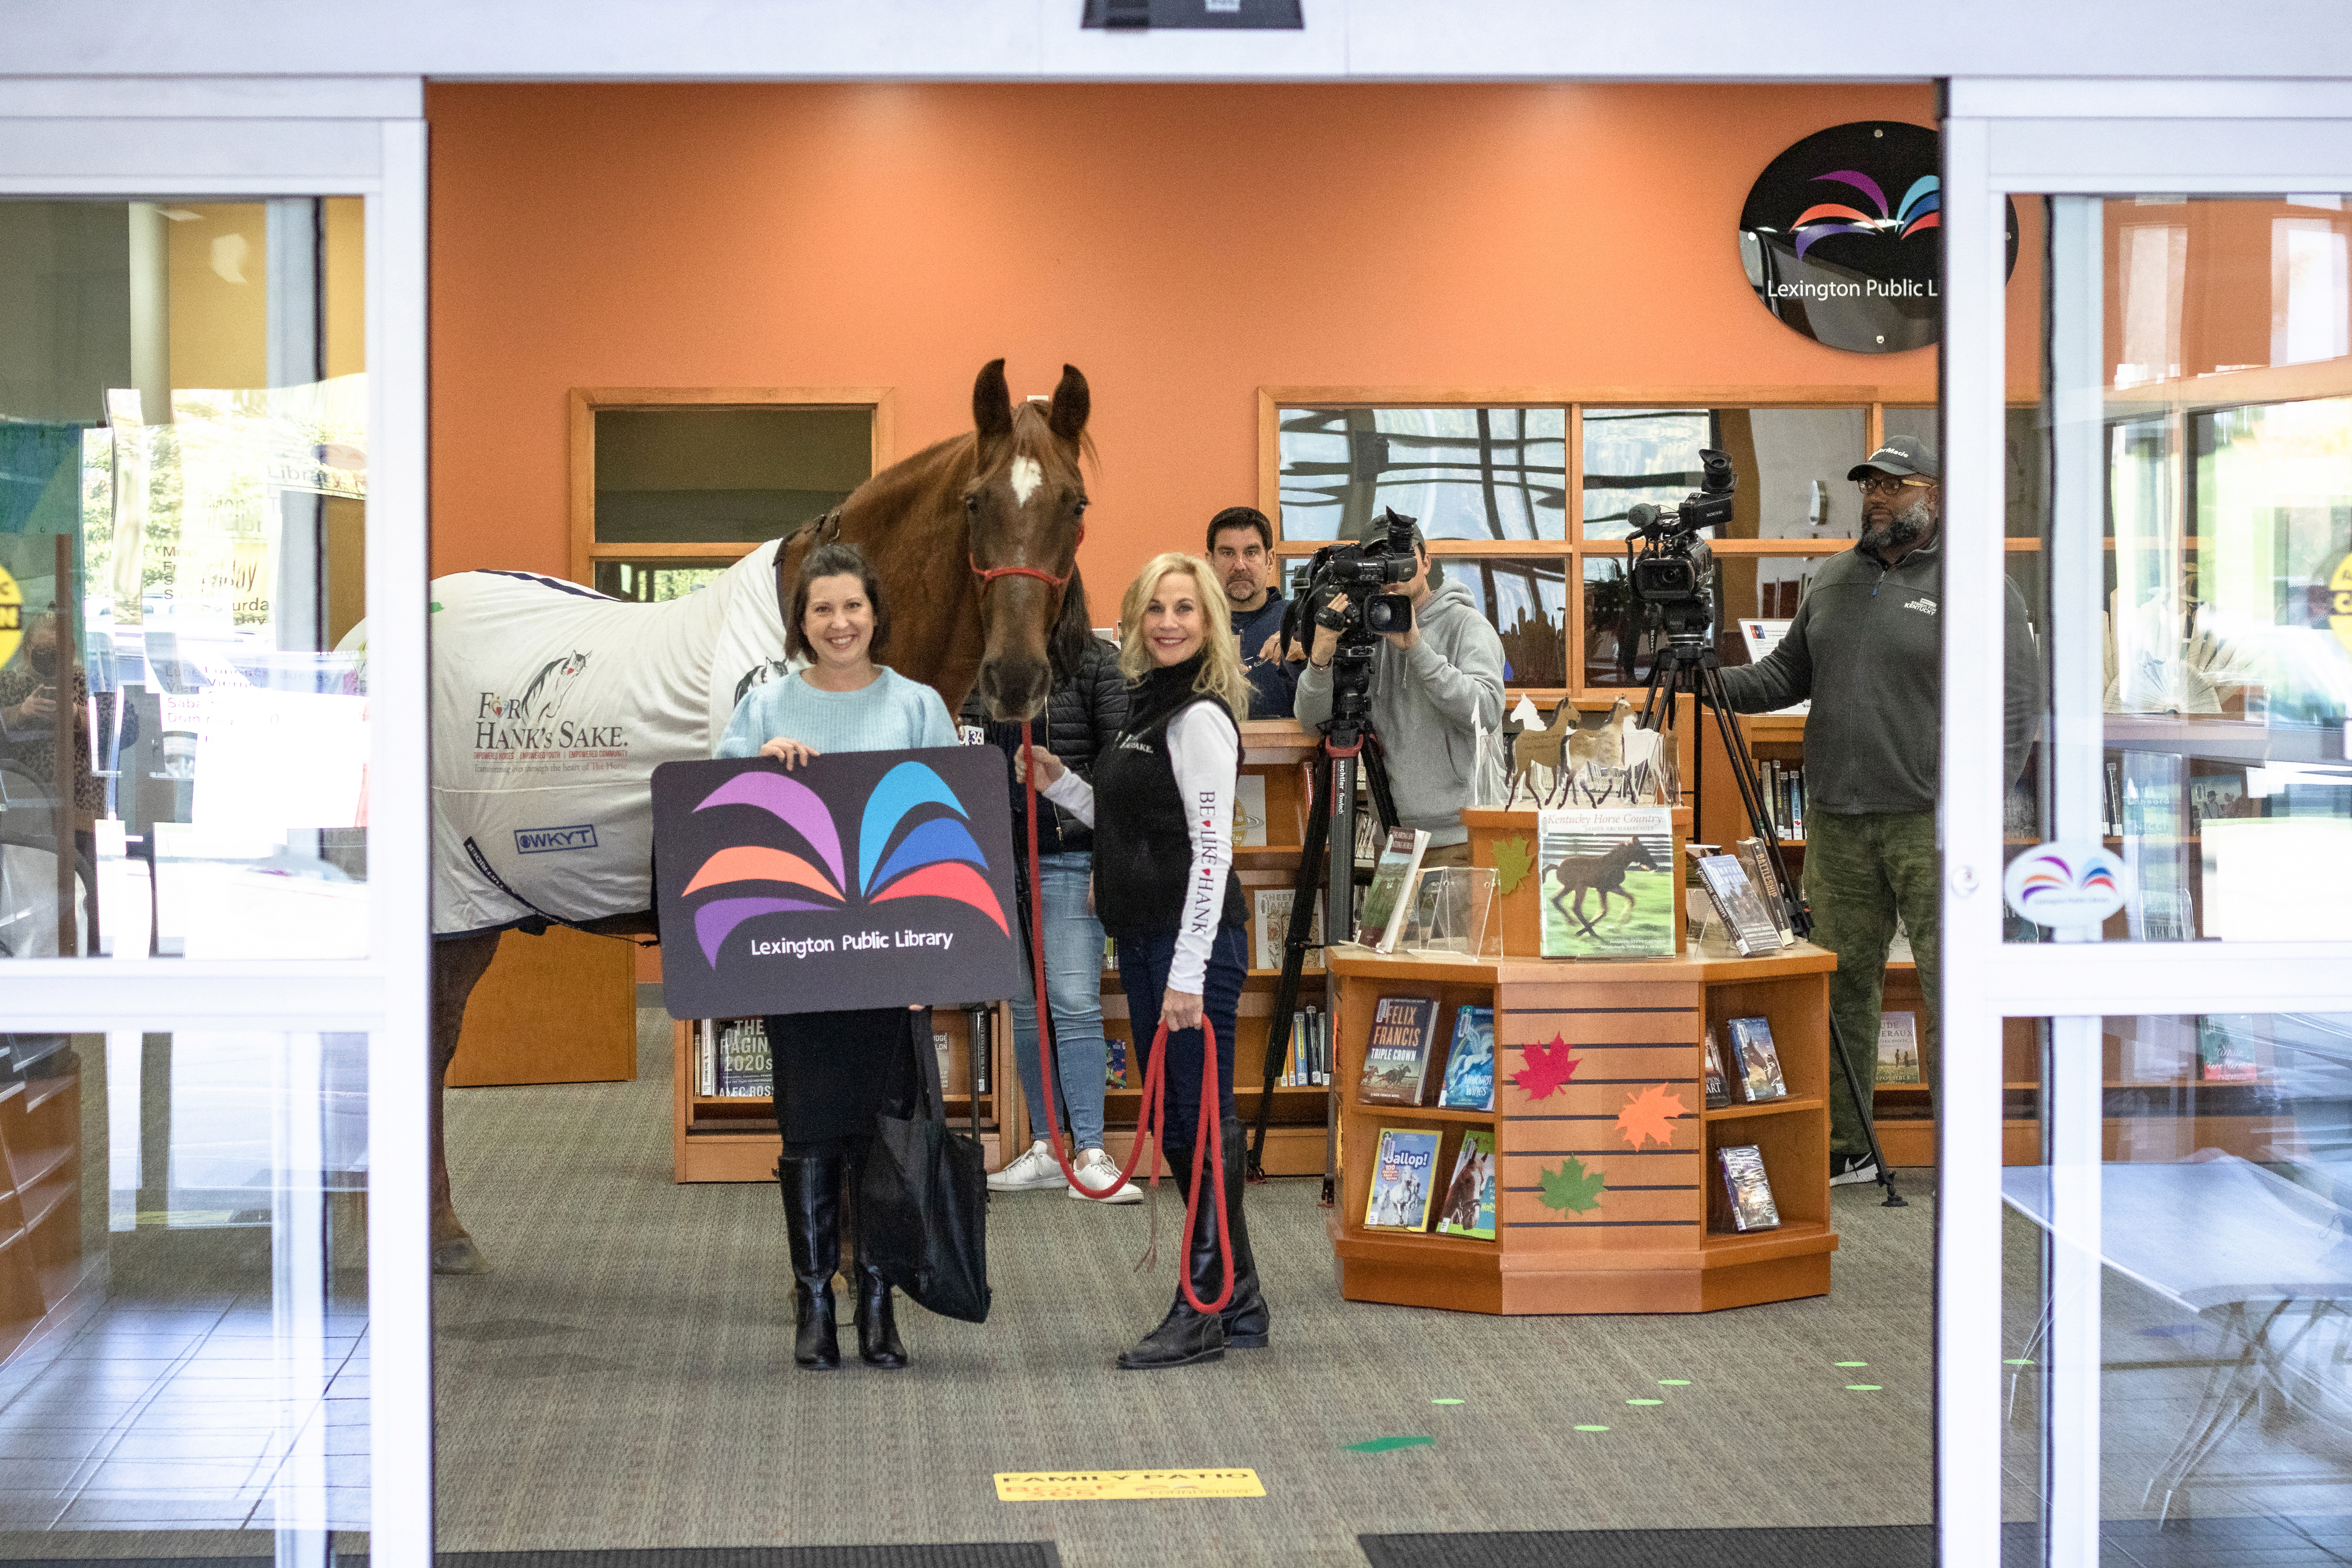 Hank inside the library with his horse-sized library card